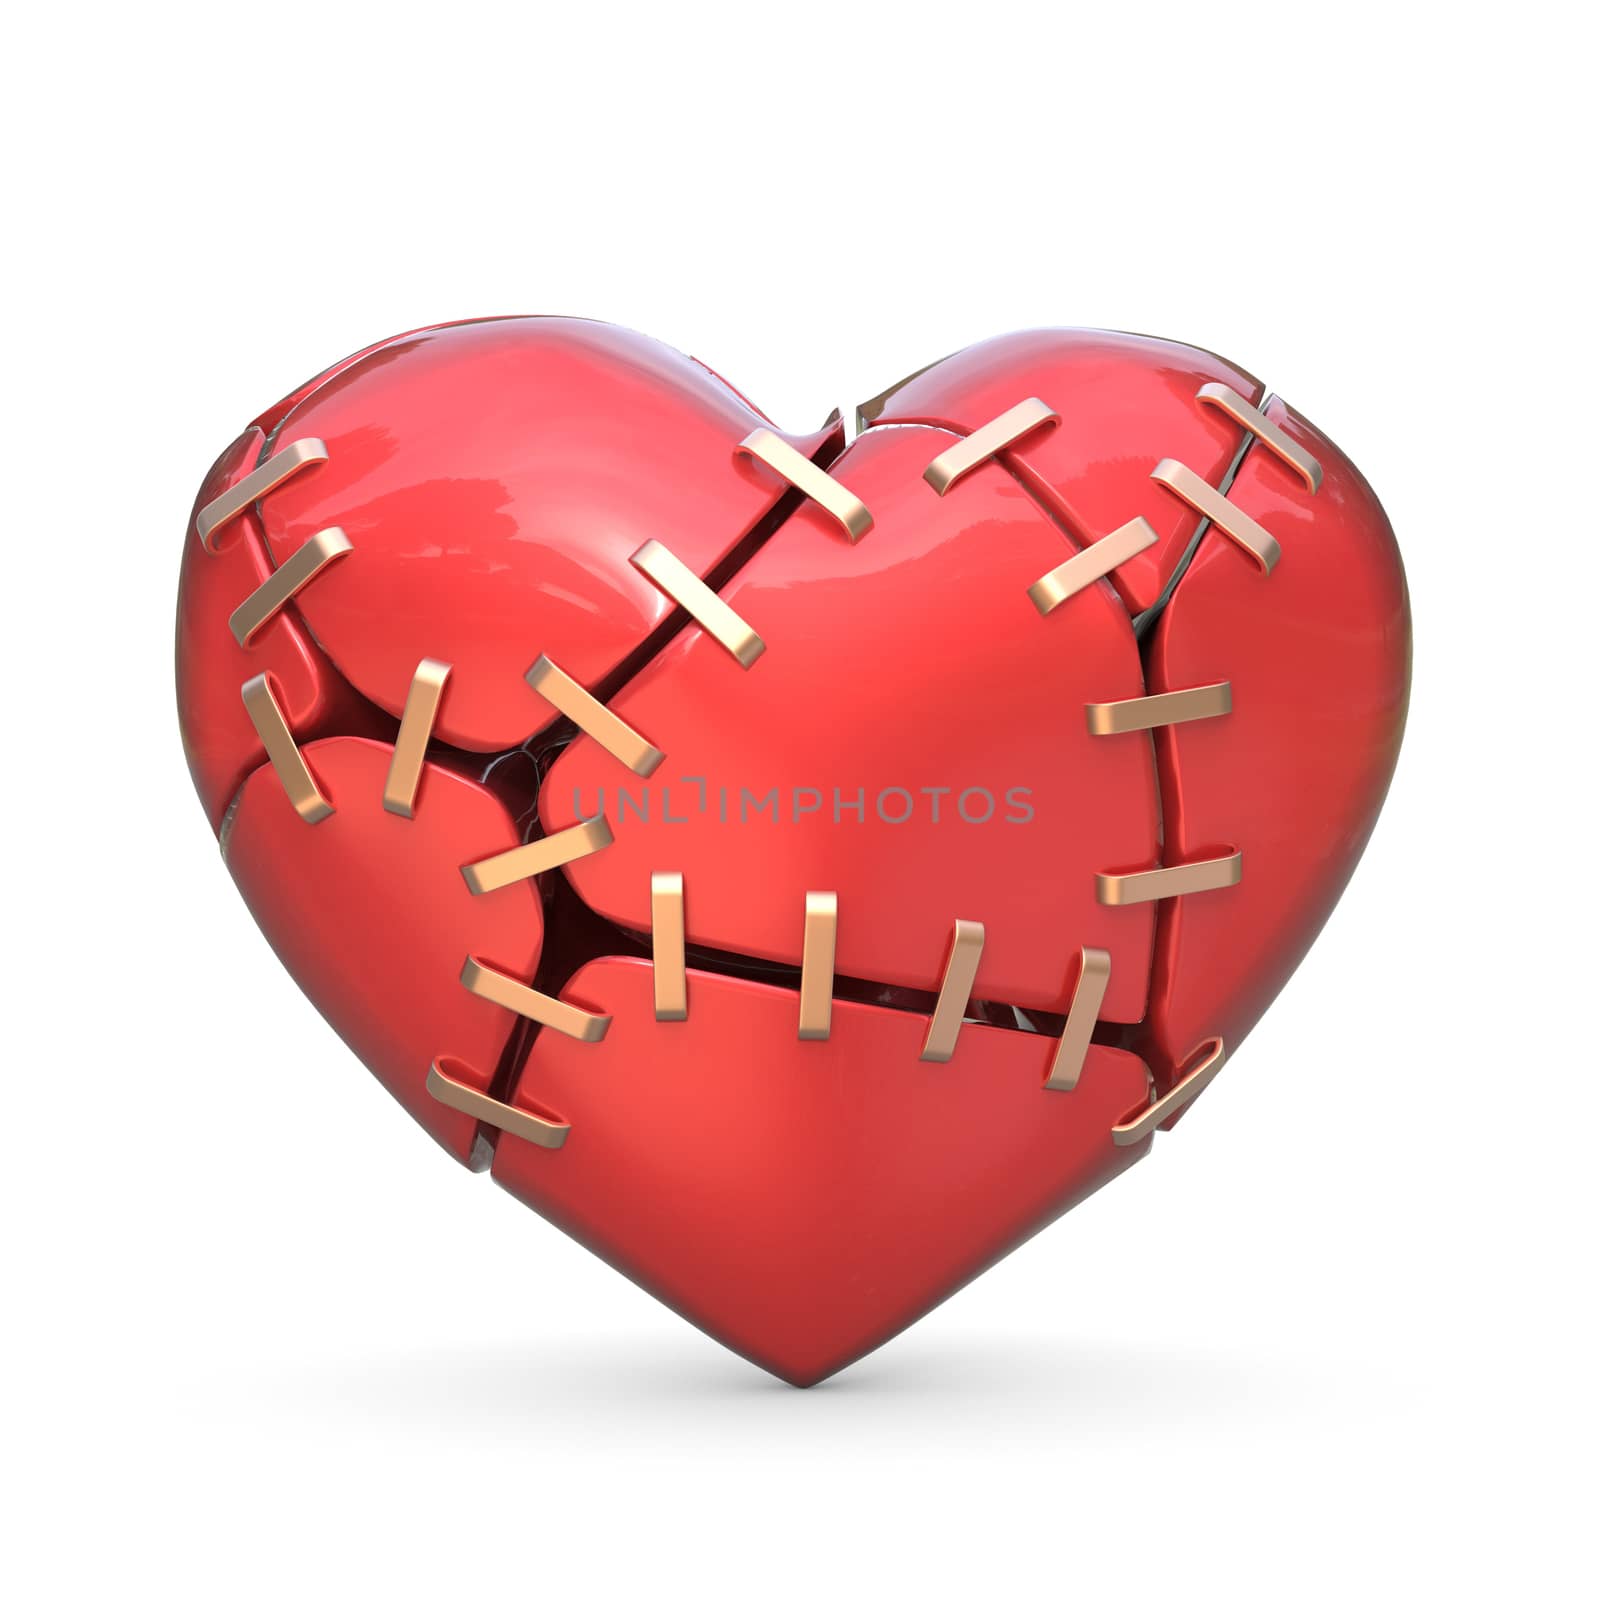 Broken red heart joined with metal staples. 3D by djmilic